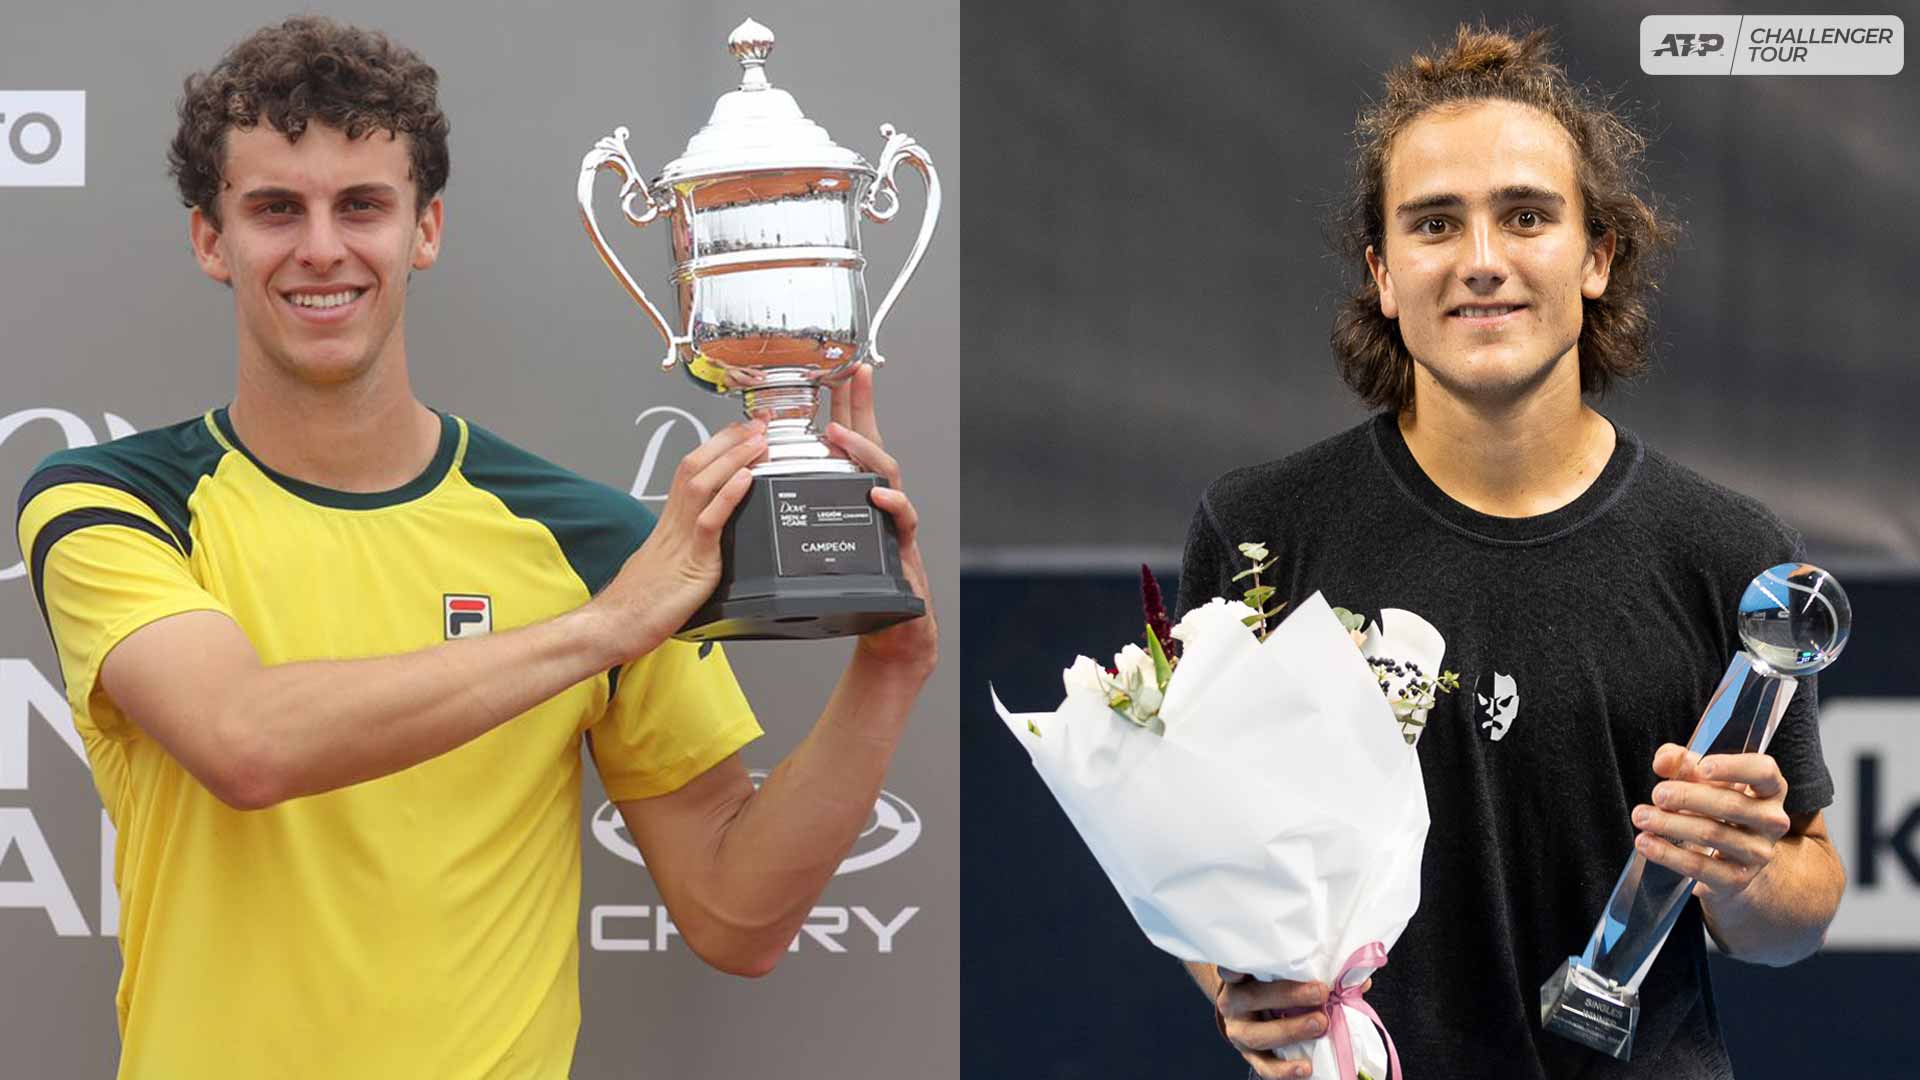 Juan Manuel Cerundolo (left) and Mattia Bellucci earned their second Challenger titles of 2022 on Sunday.